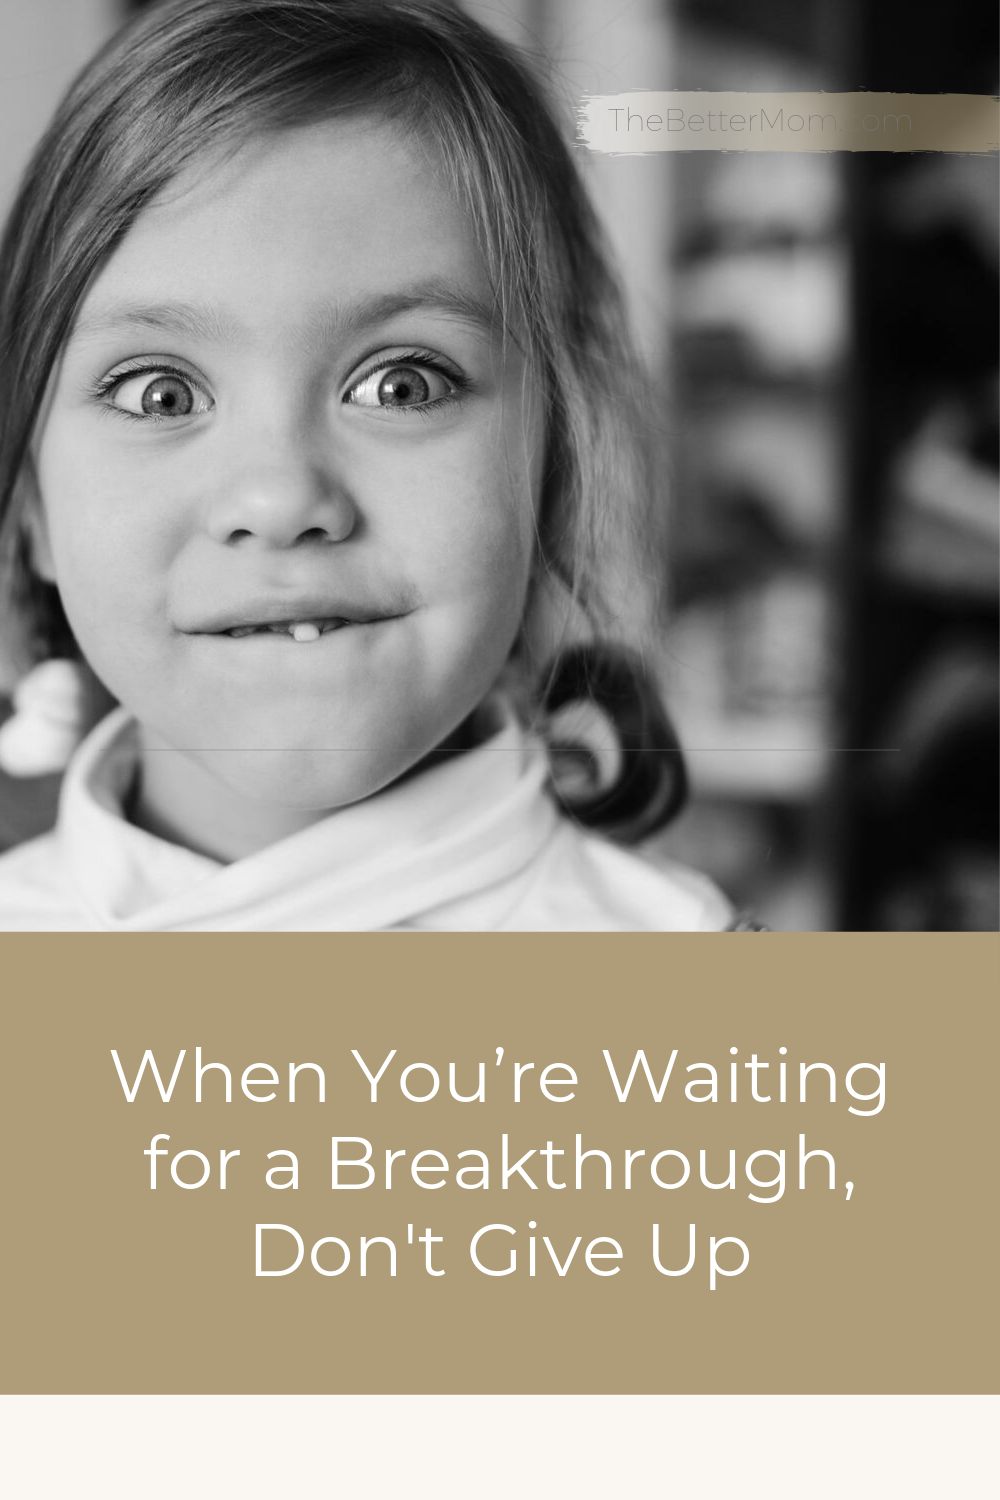 When You’re Waiting for a Breakthrough…